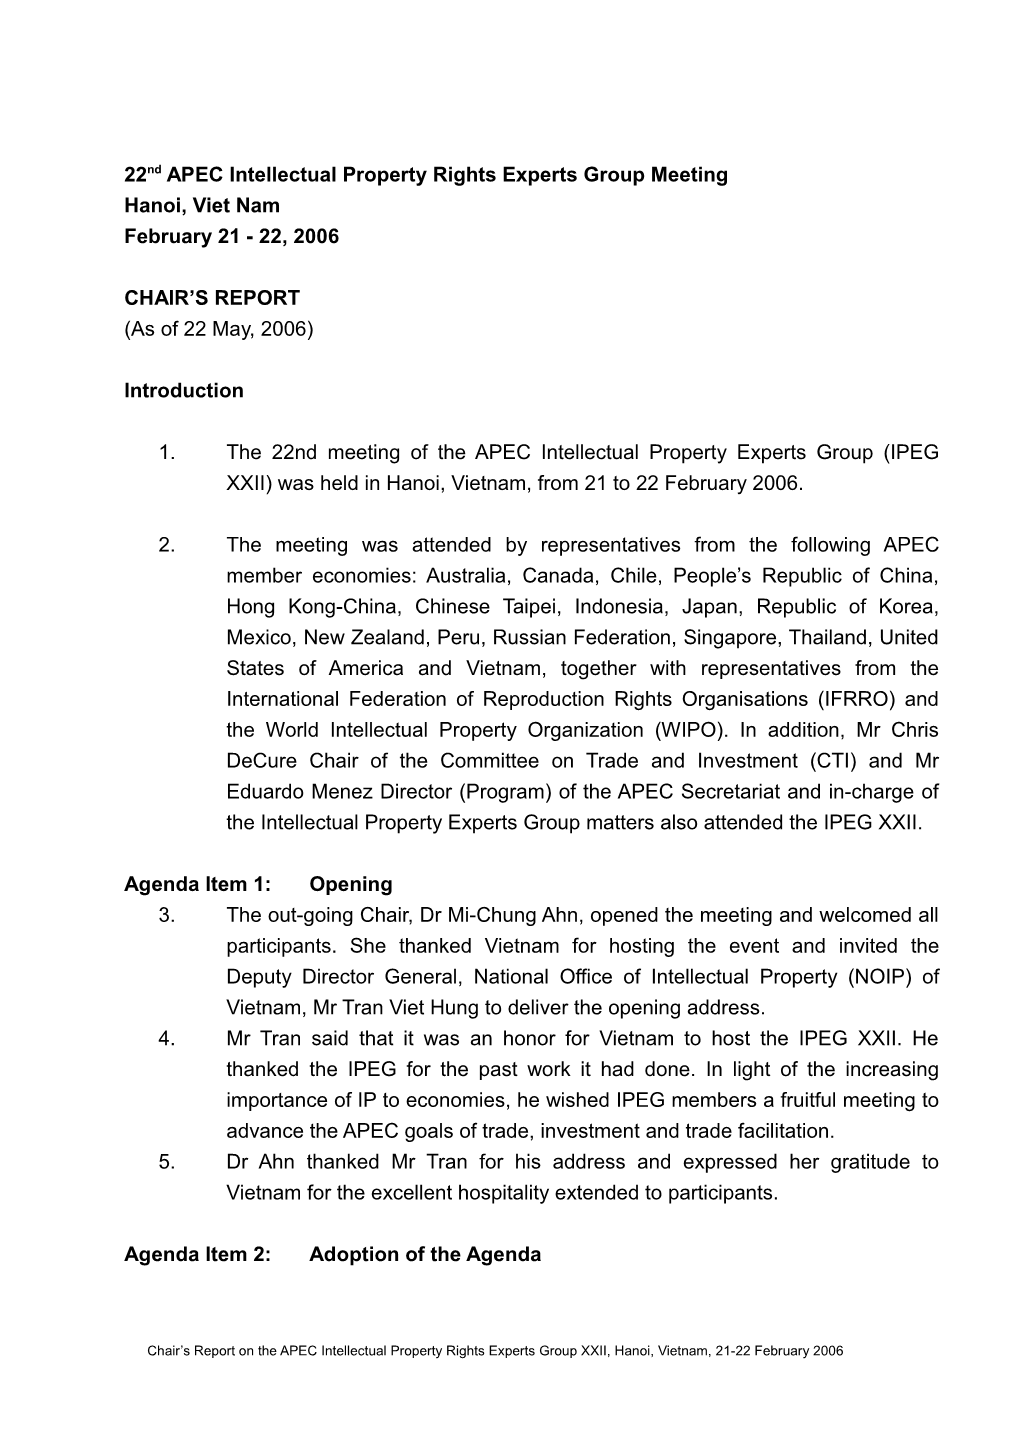 APEC Intellectual Property Rights Experts Group XIX